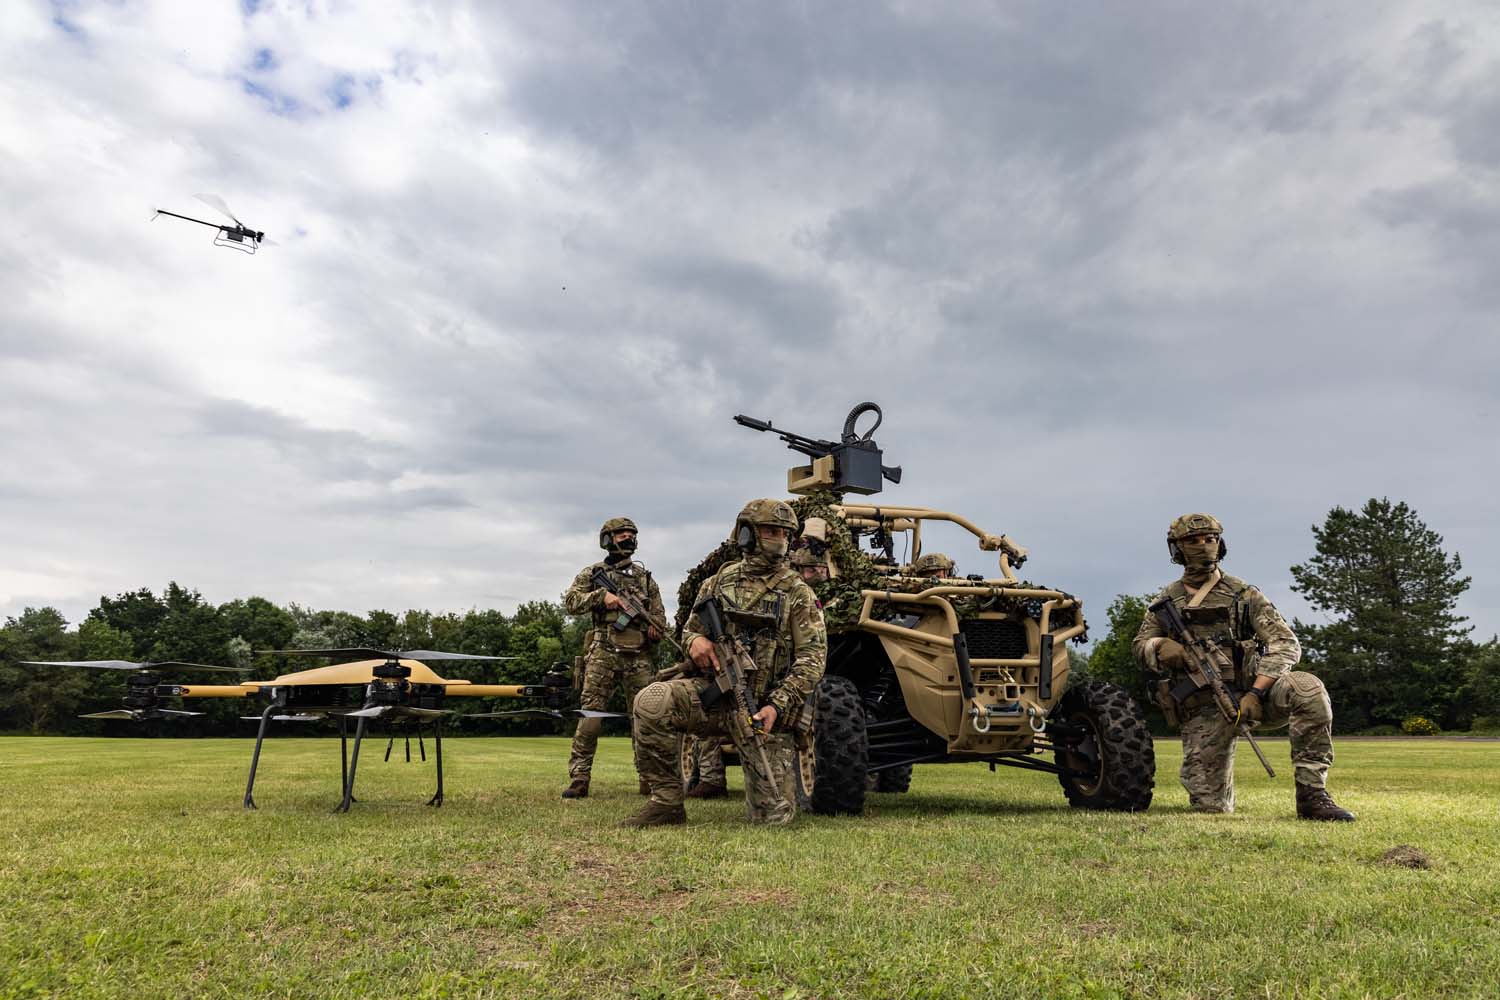 Royal Marines Commandos Operate Drone Swarms During Autonomous Advance Force 4.0 Exercises